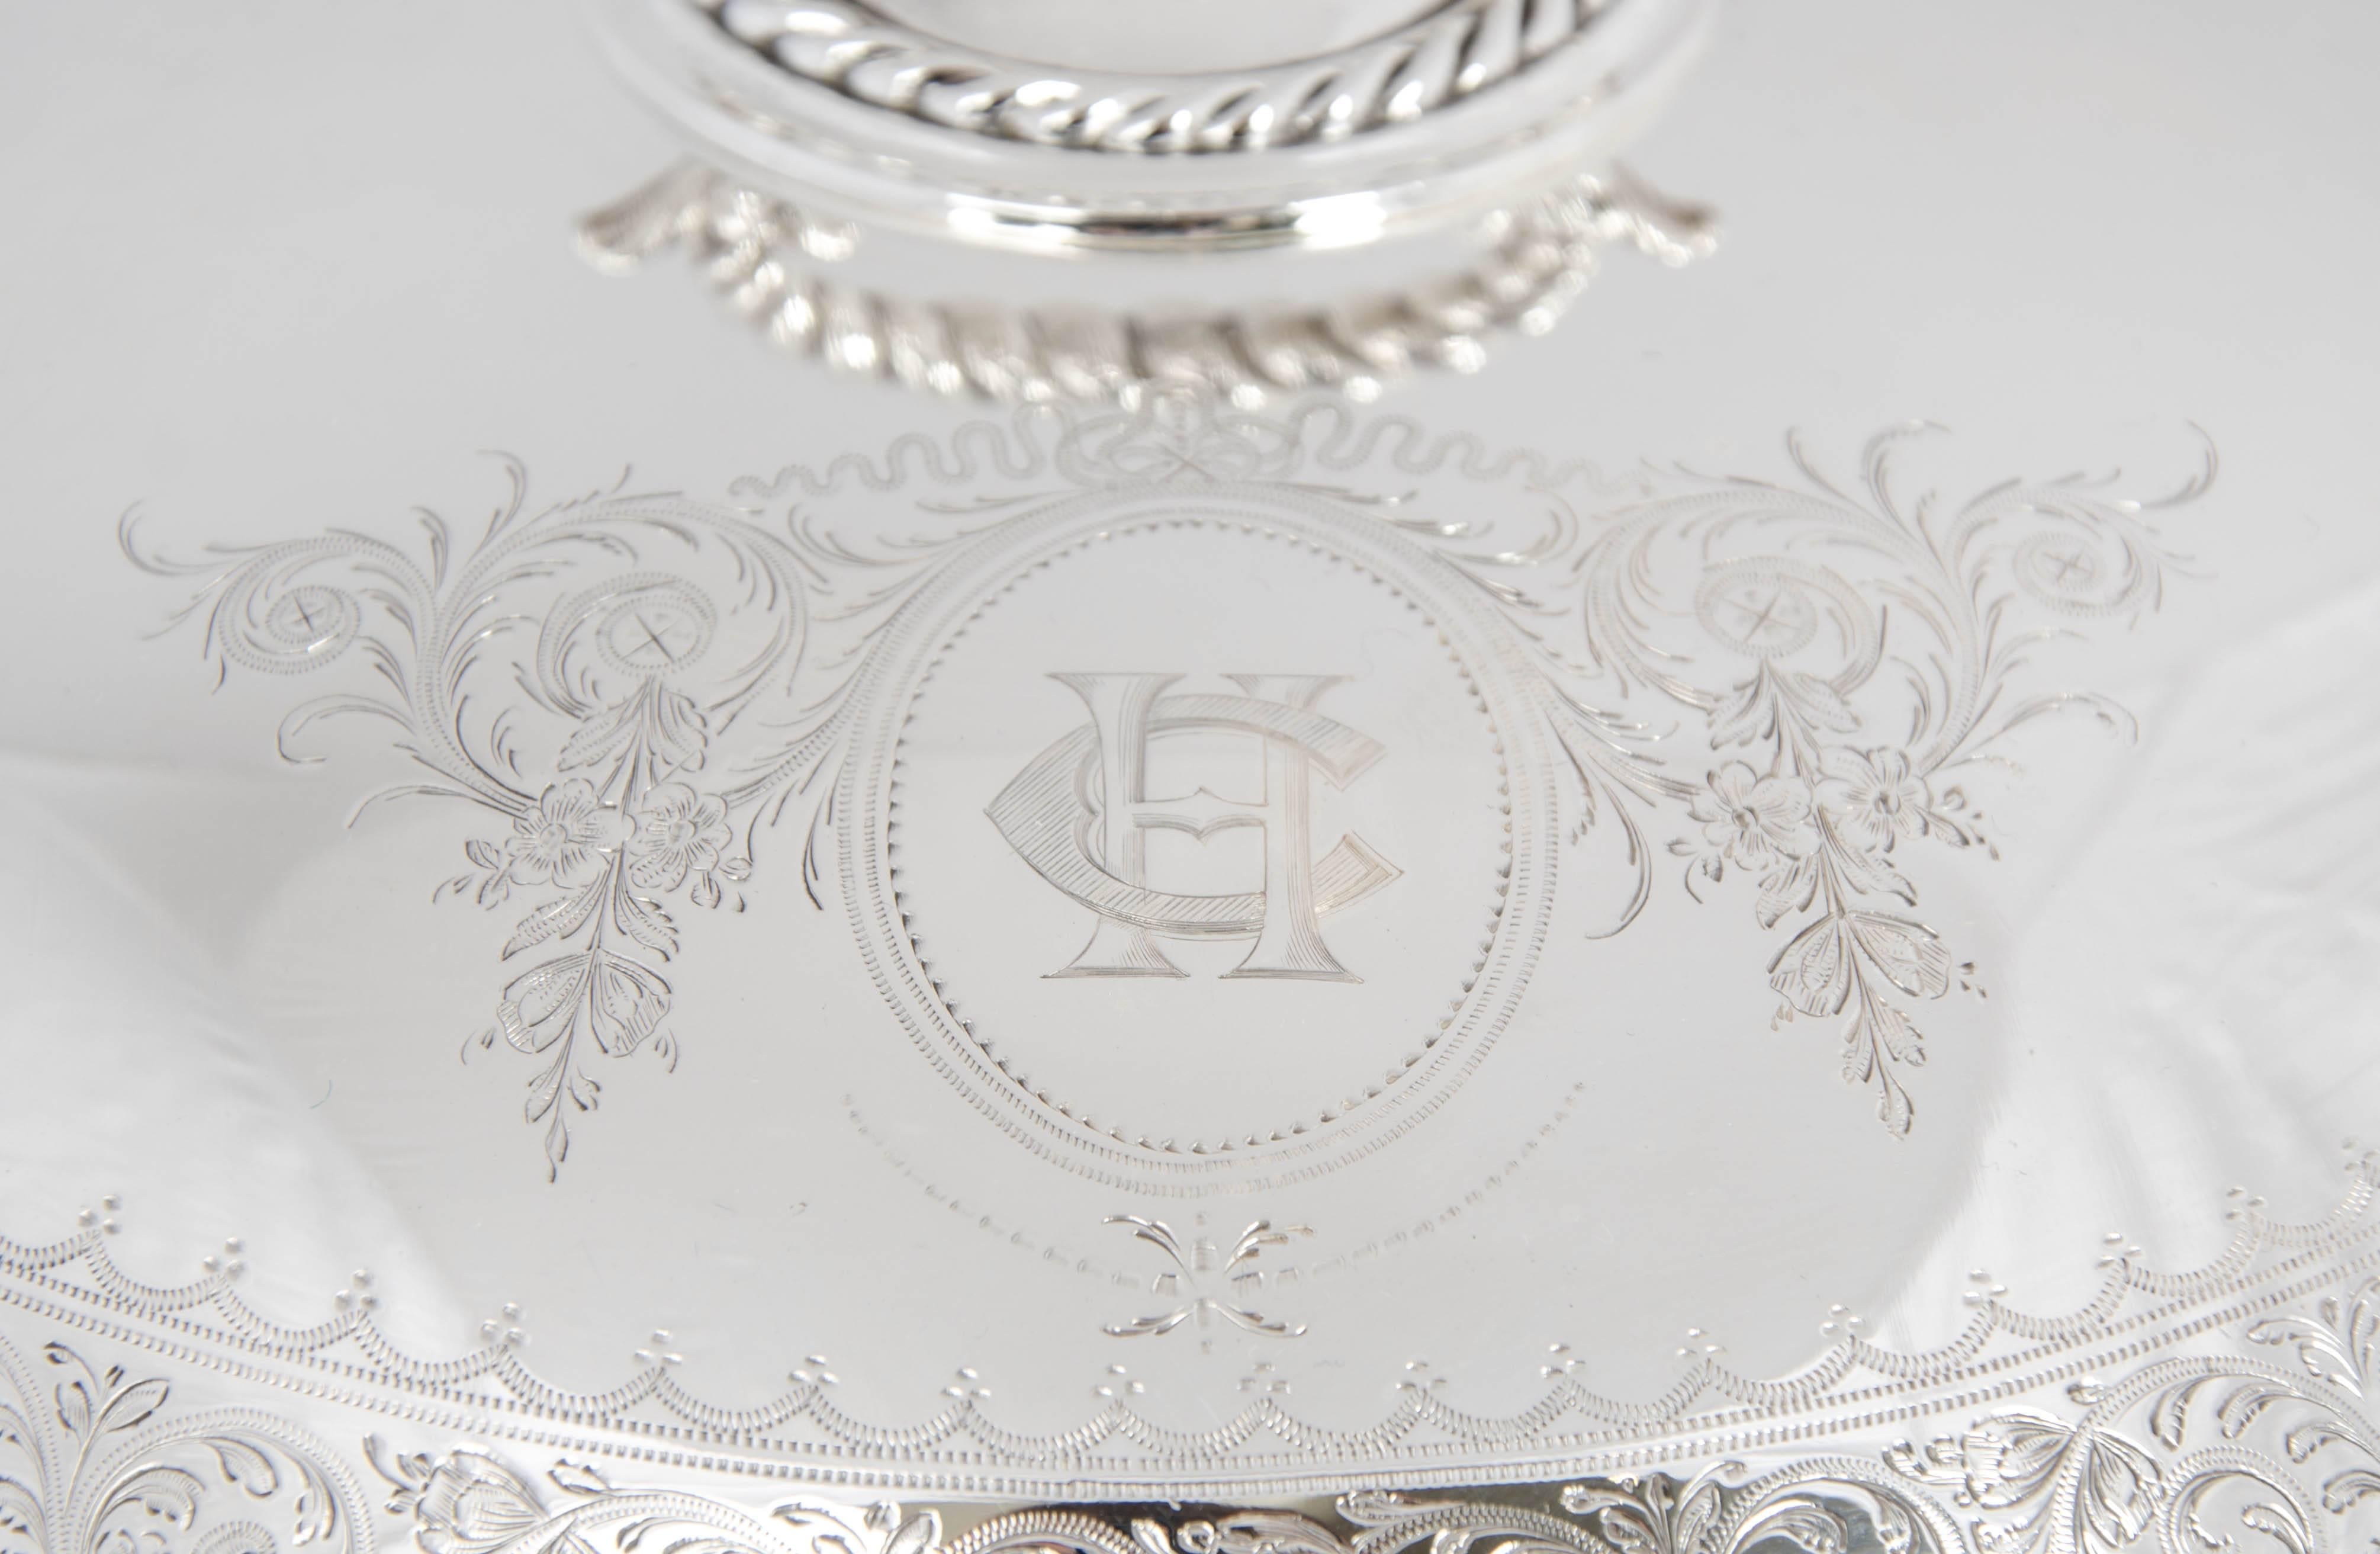 Silver plate serving dish with removable partition. It has a rope trim to the dish with fine engraving around the edge of the lid.